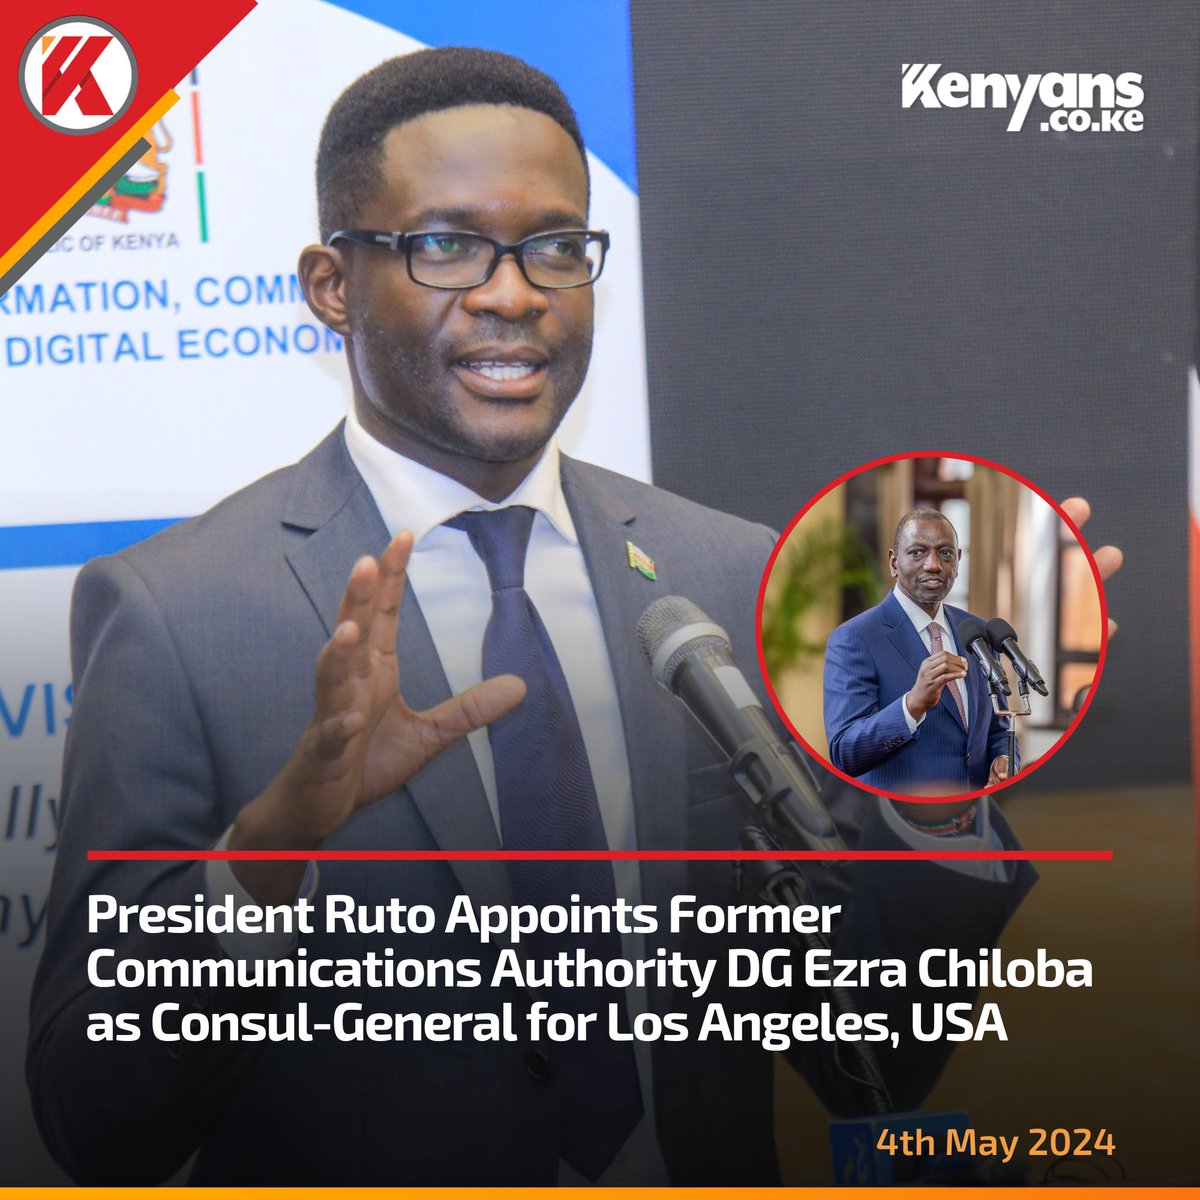 President Ruto appoints Ezra Chiloba as Consul-General for Los Angeles, USA